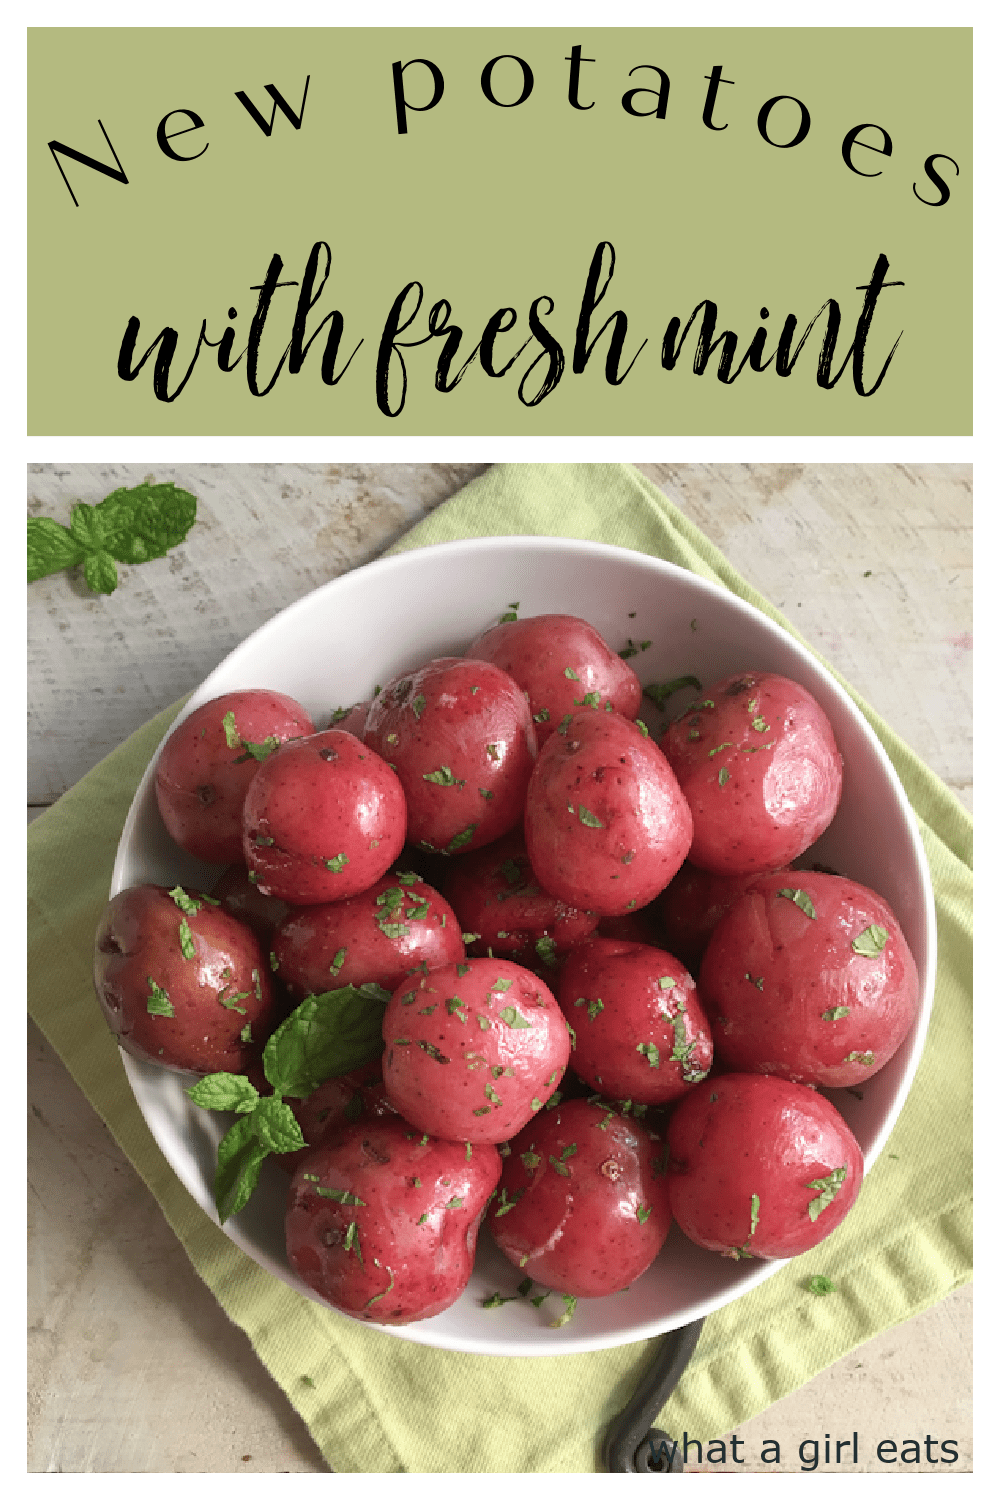 New potatoes with fresh mint are light and simple side dish that are the perfect accompaniment to a variety of spring dishes.